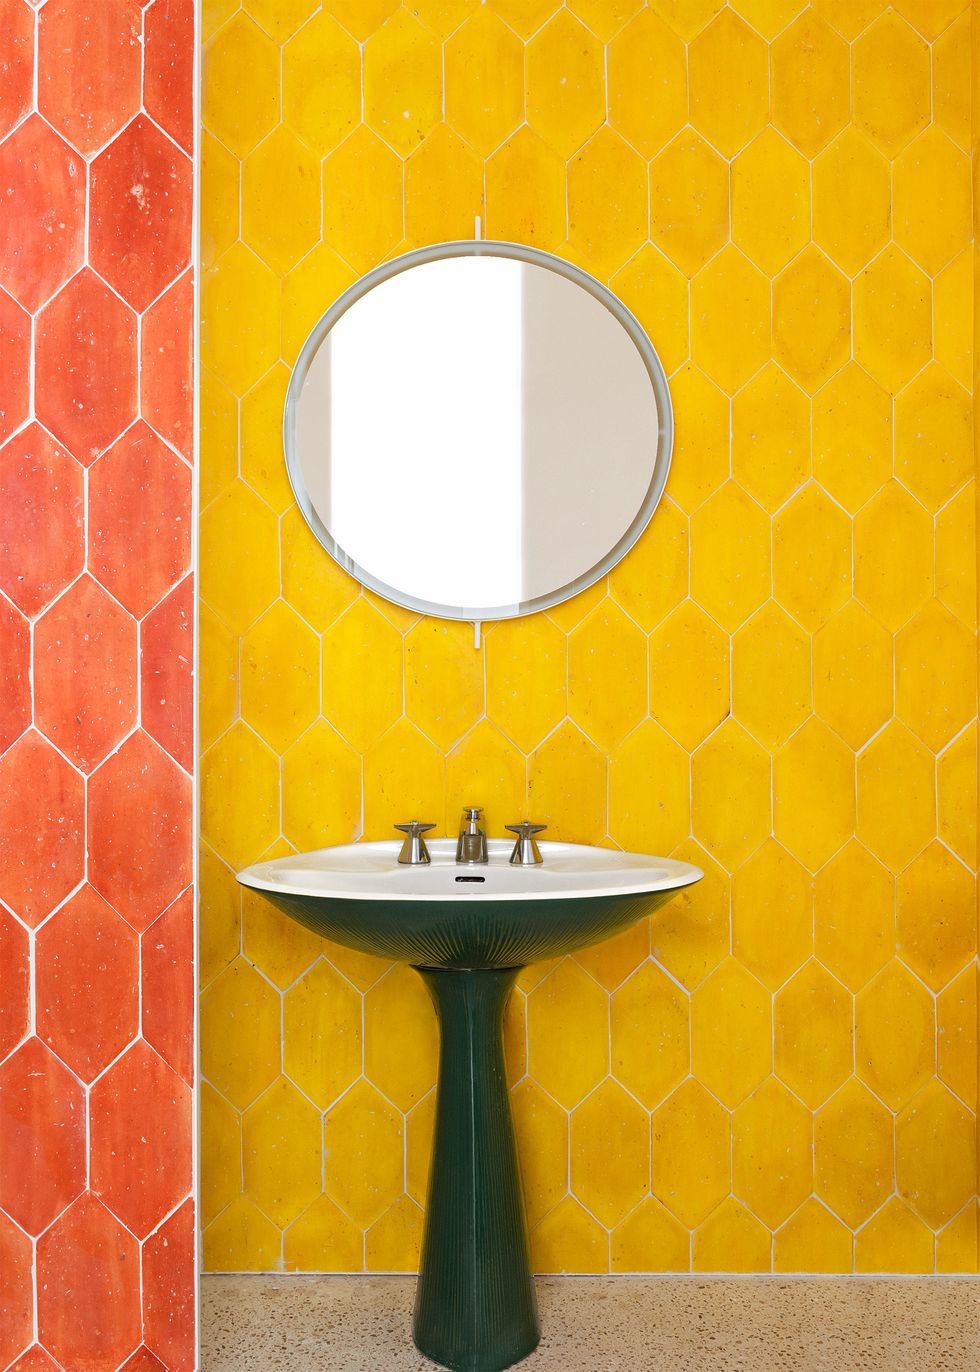 pedestal sink in bathroom with yellow tiles